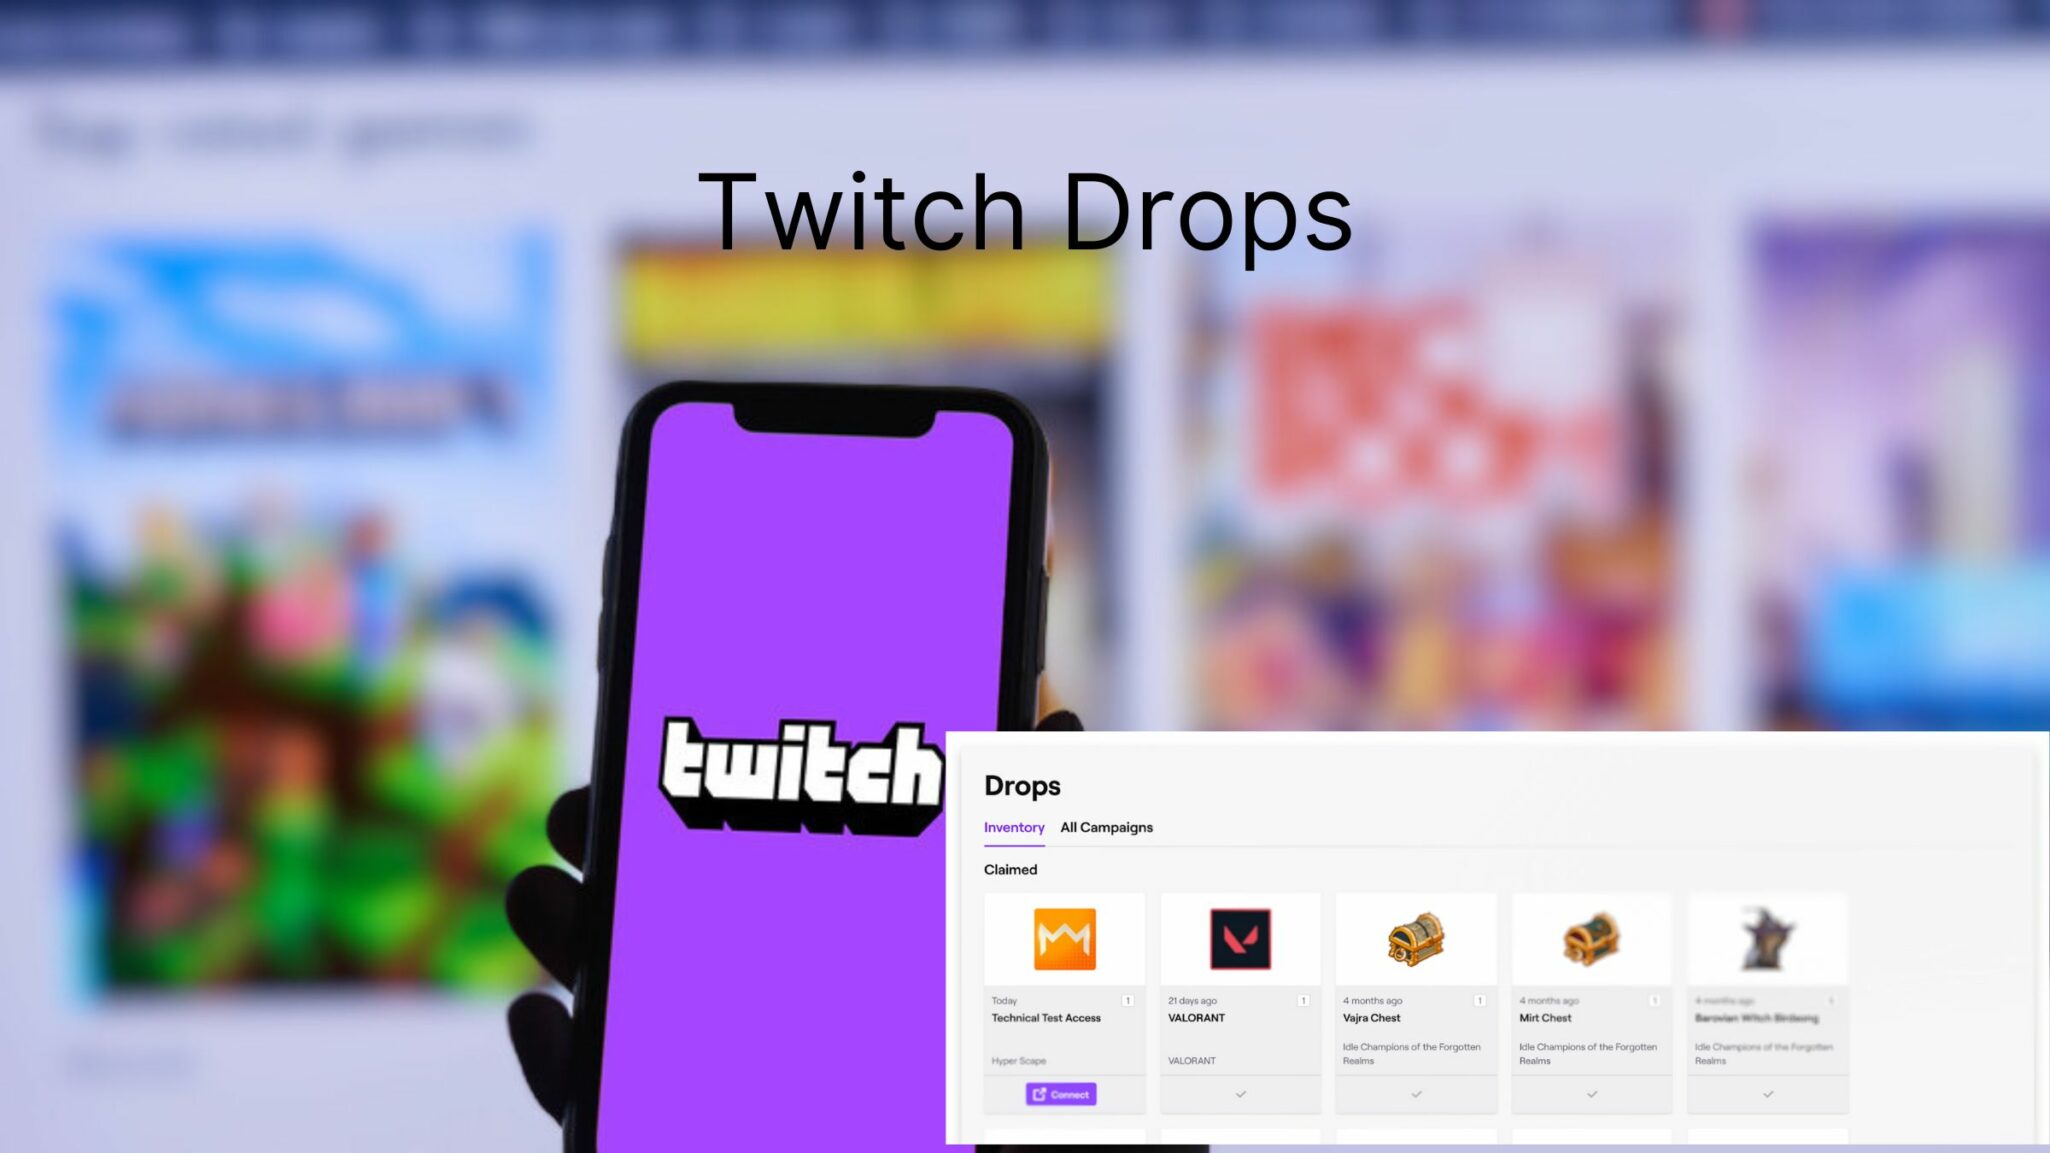 How to Check Twitch Drops Inventory